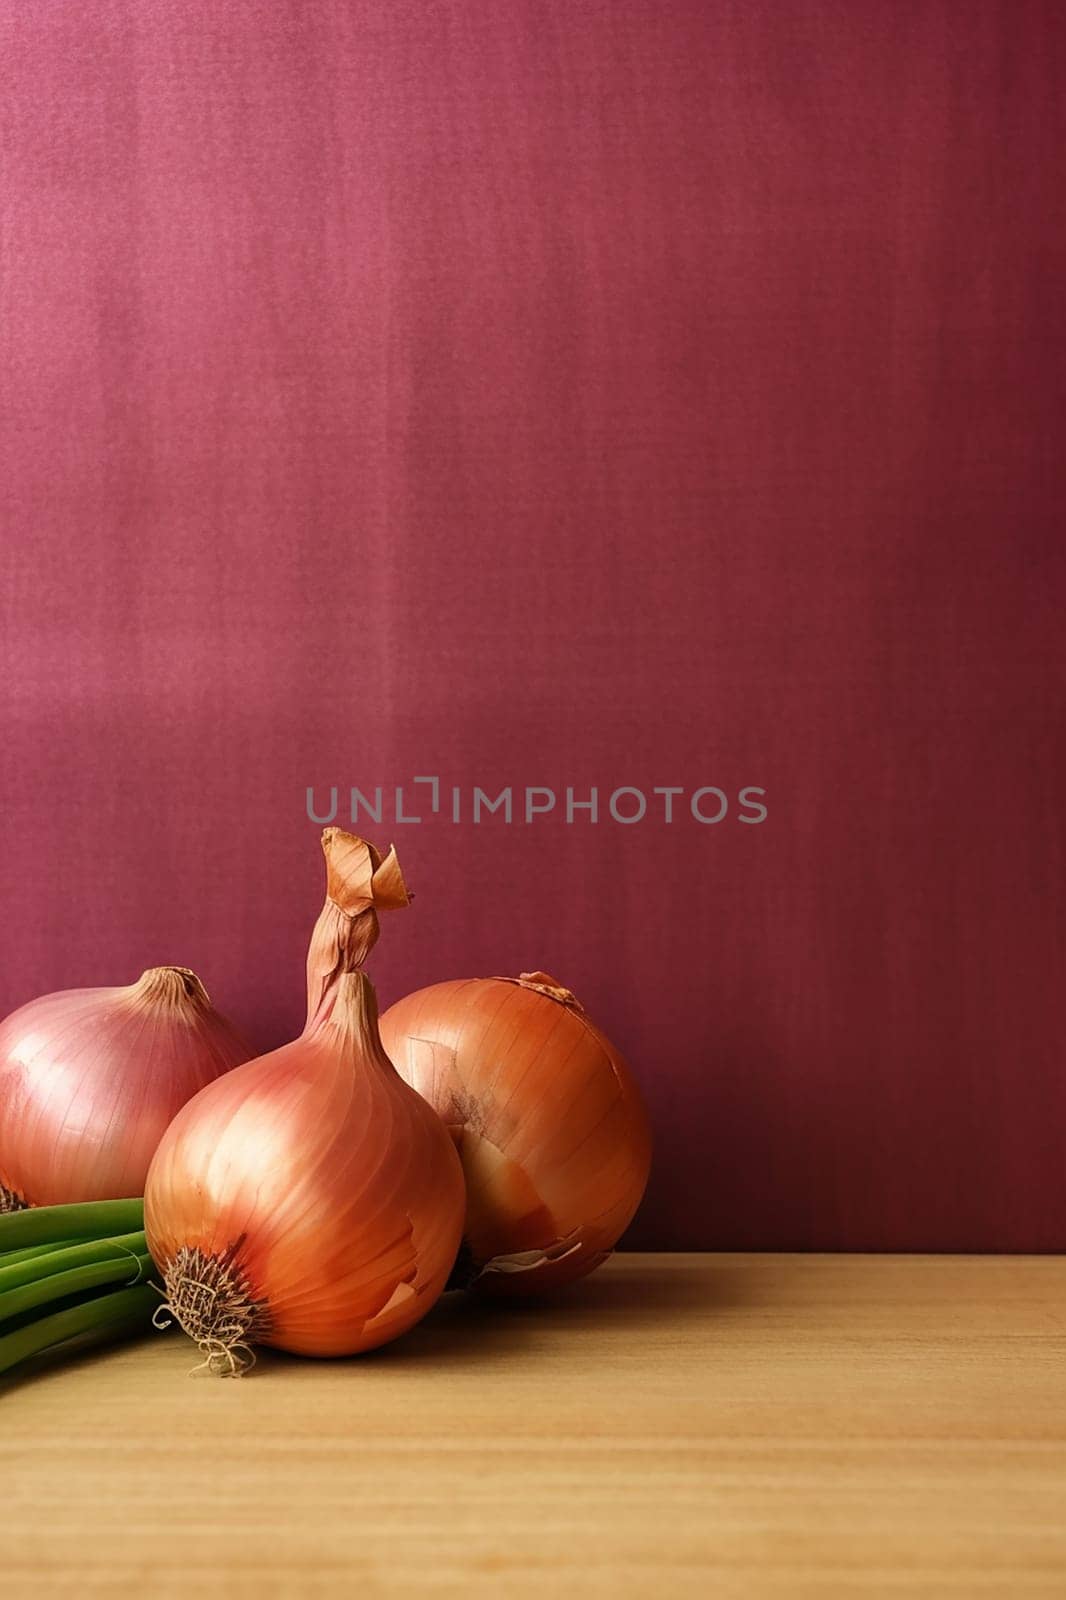 Several onions placed on a wooden surface against a maroon background.